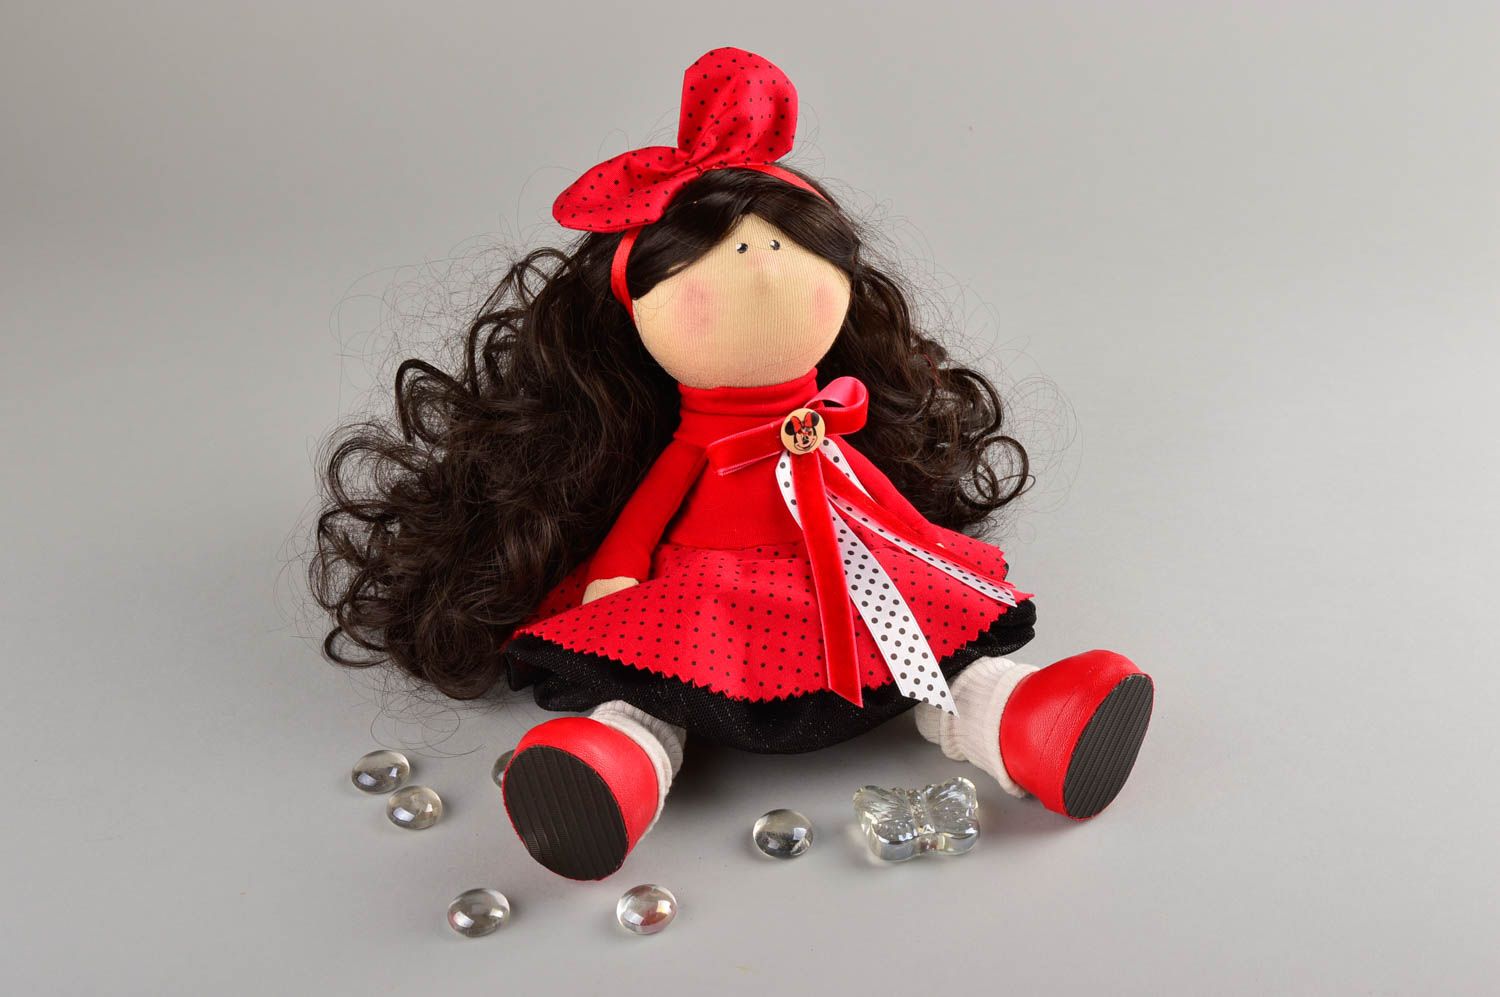 Designer doll bright handmade doll in red dress textile toy decorative use only photo 2